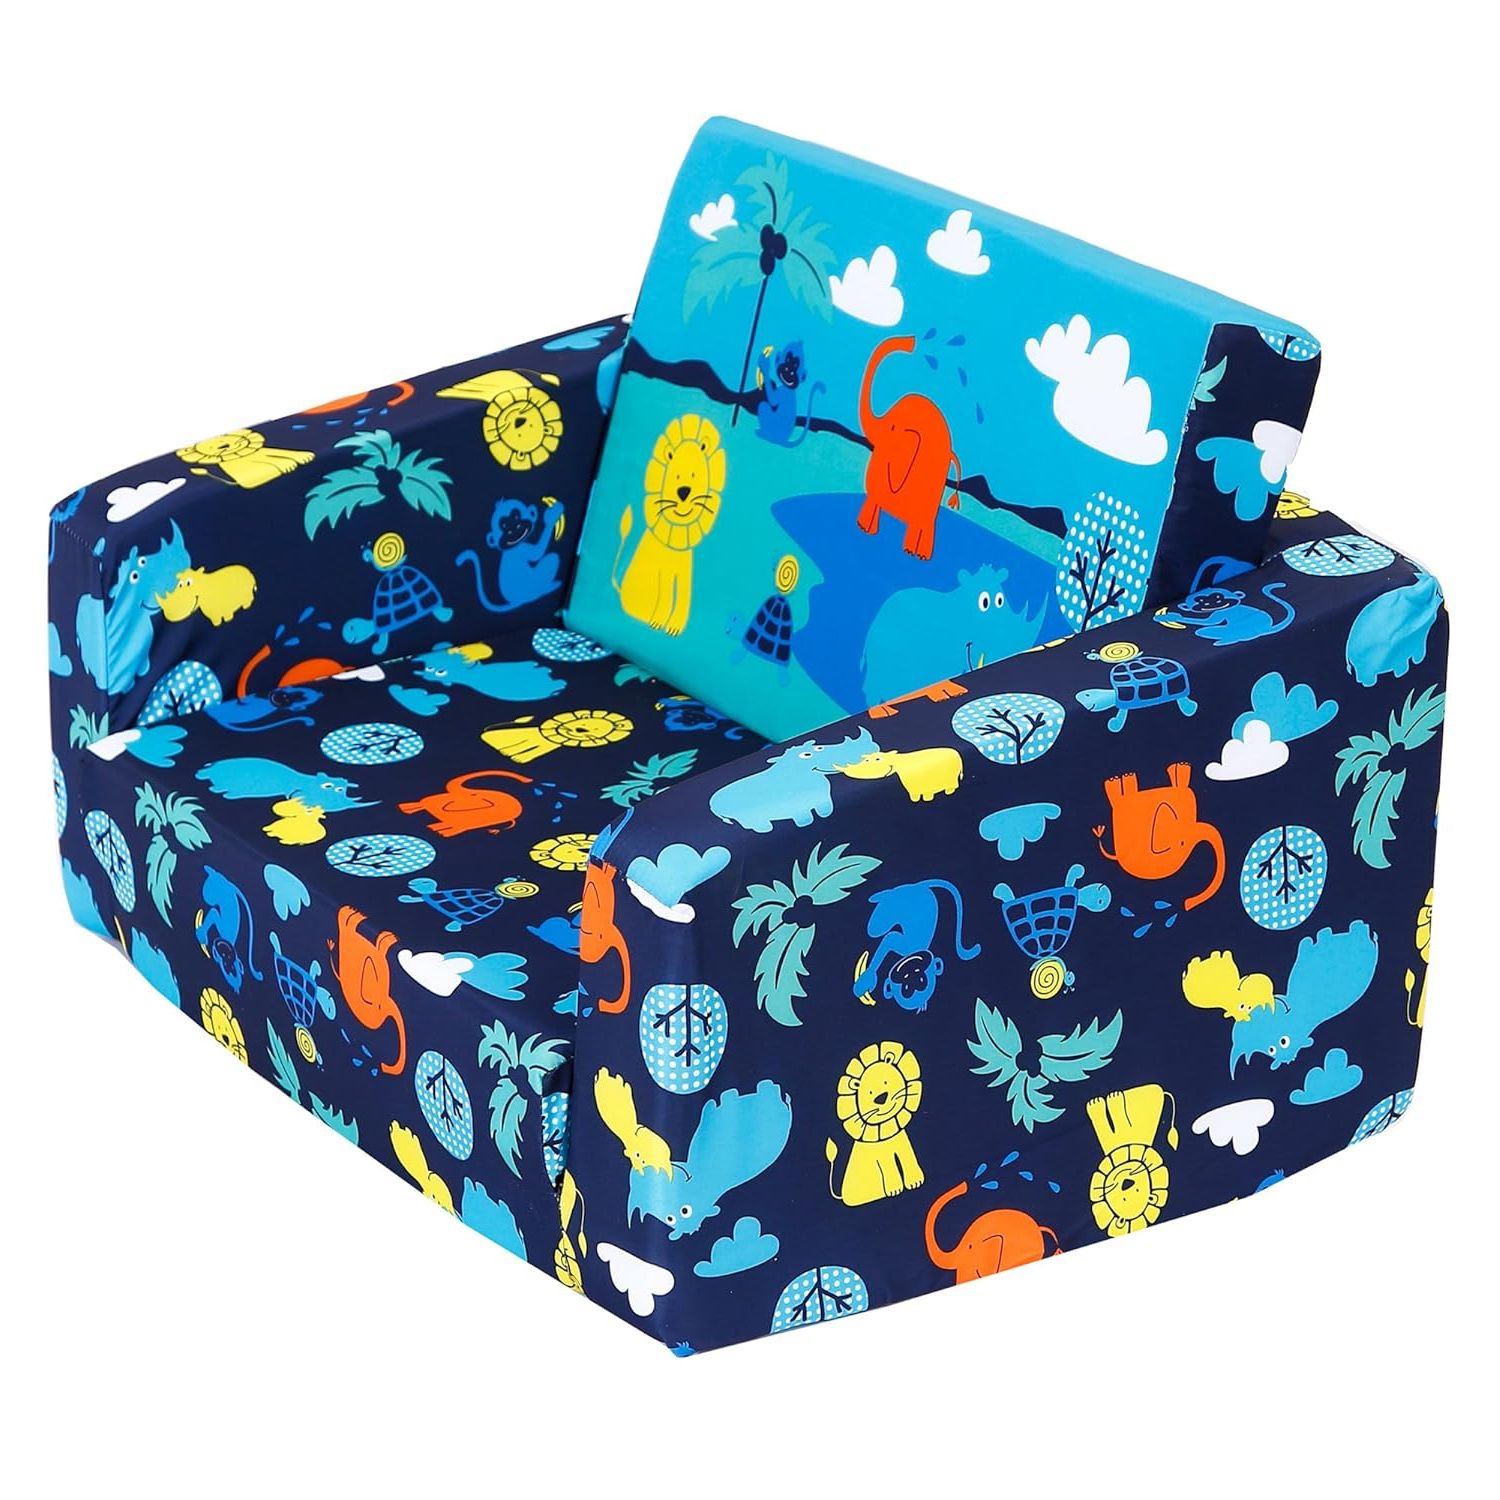 Most Recent Mallbest Kids Sofas Children's Sofa Bed Baby's Upholstered Couch With Children's Sofa Beds (View 5 of 15)